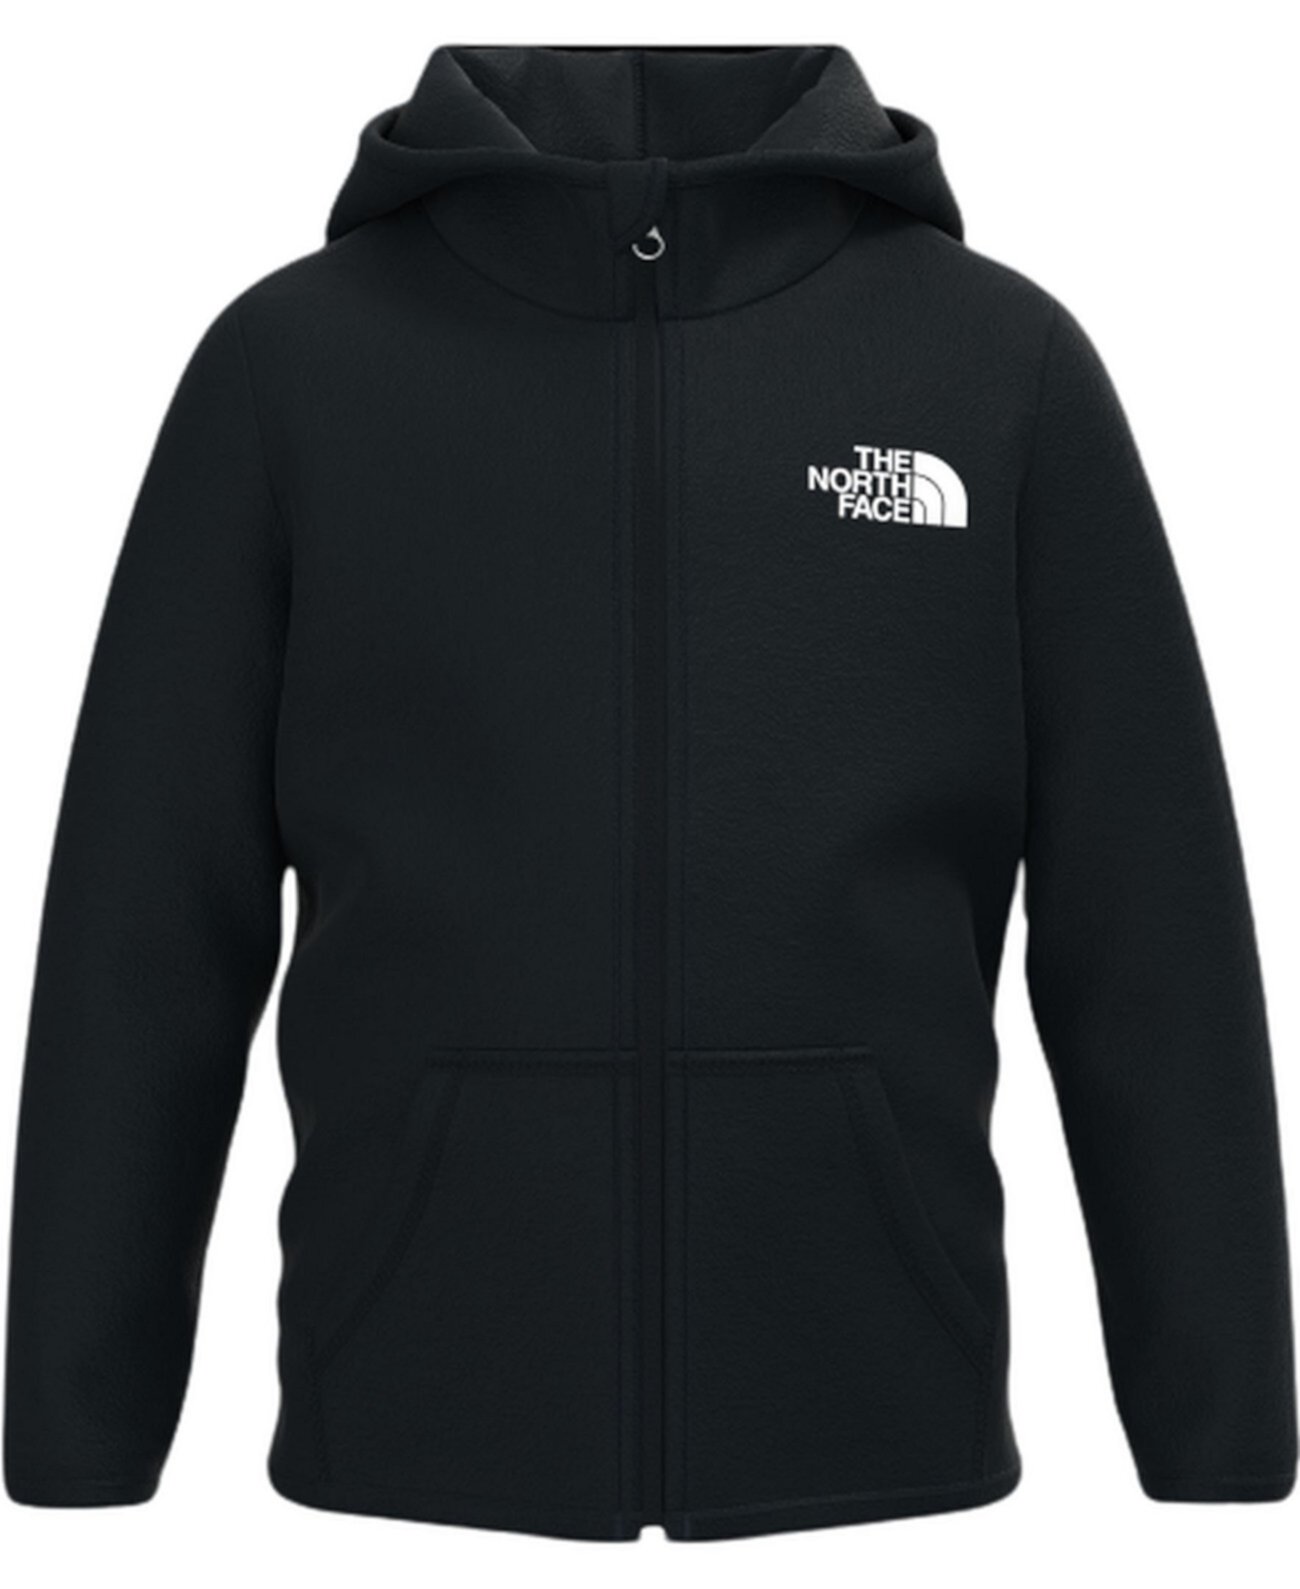 Toddler Boys Glacier Full Zip Hoodie The North Face